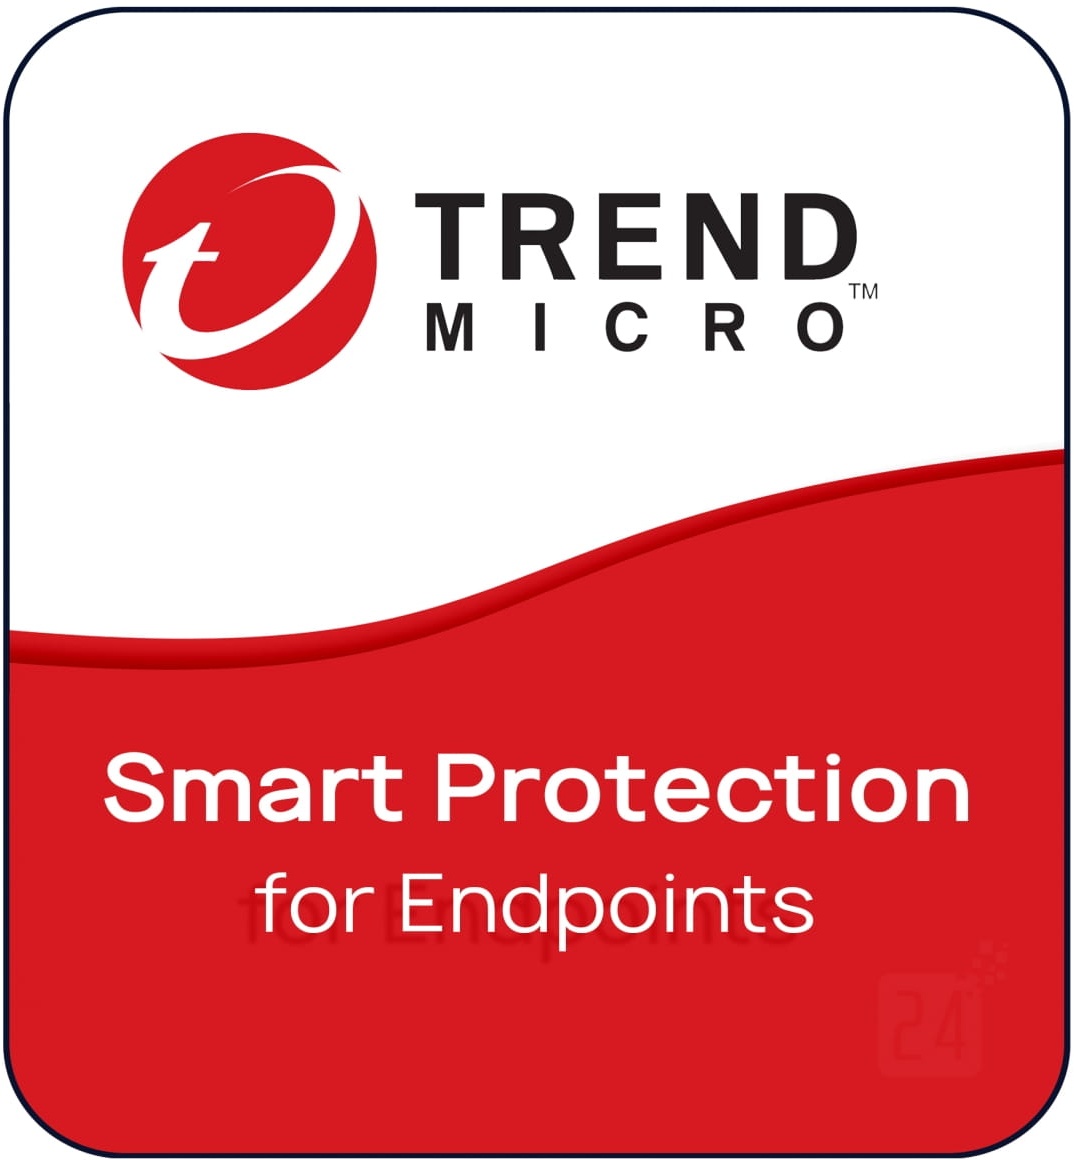 Trend Micro Smart Protection for Endpoints